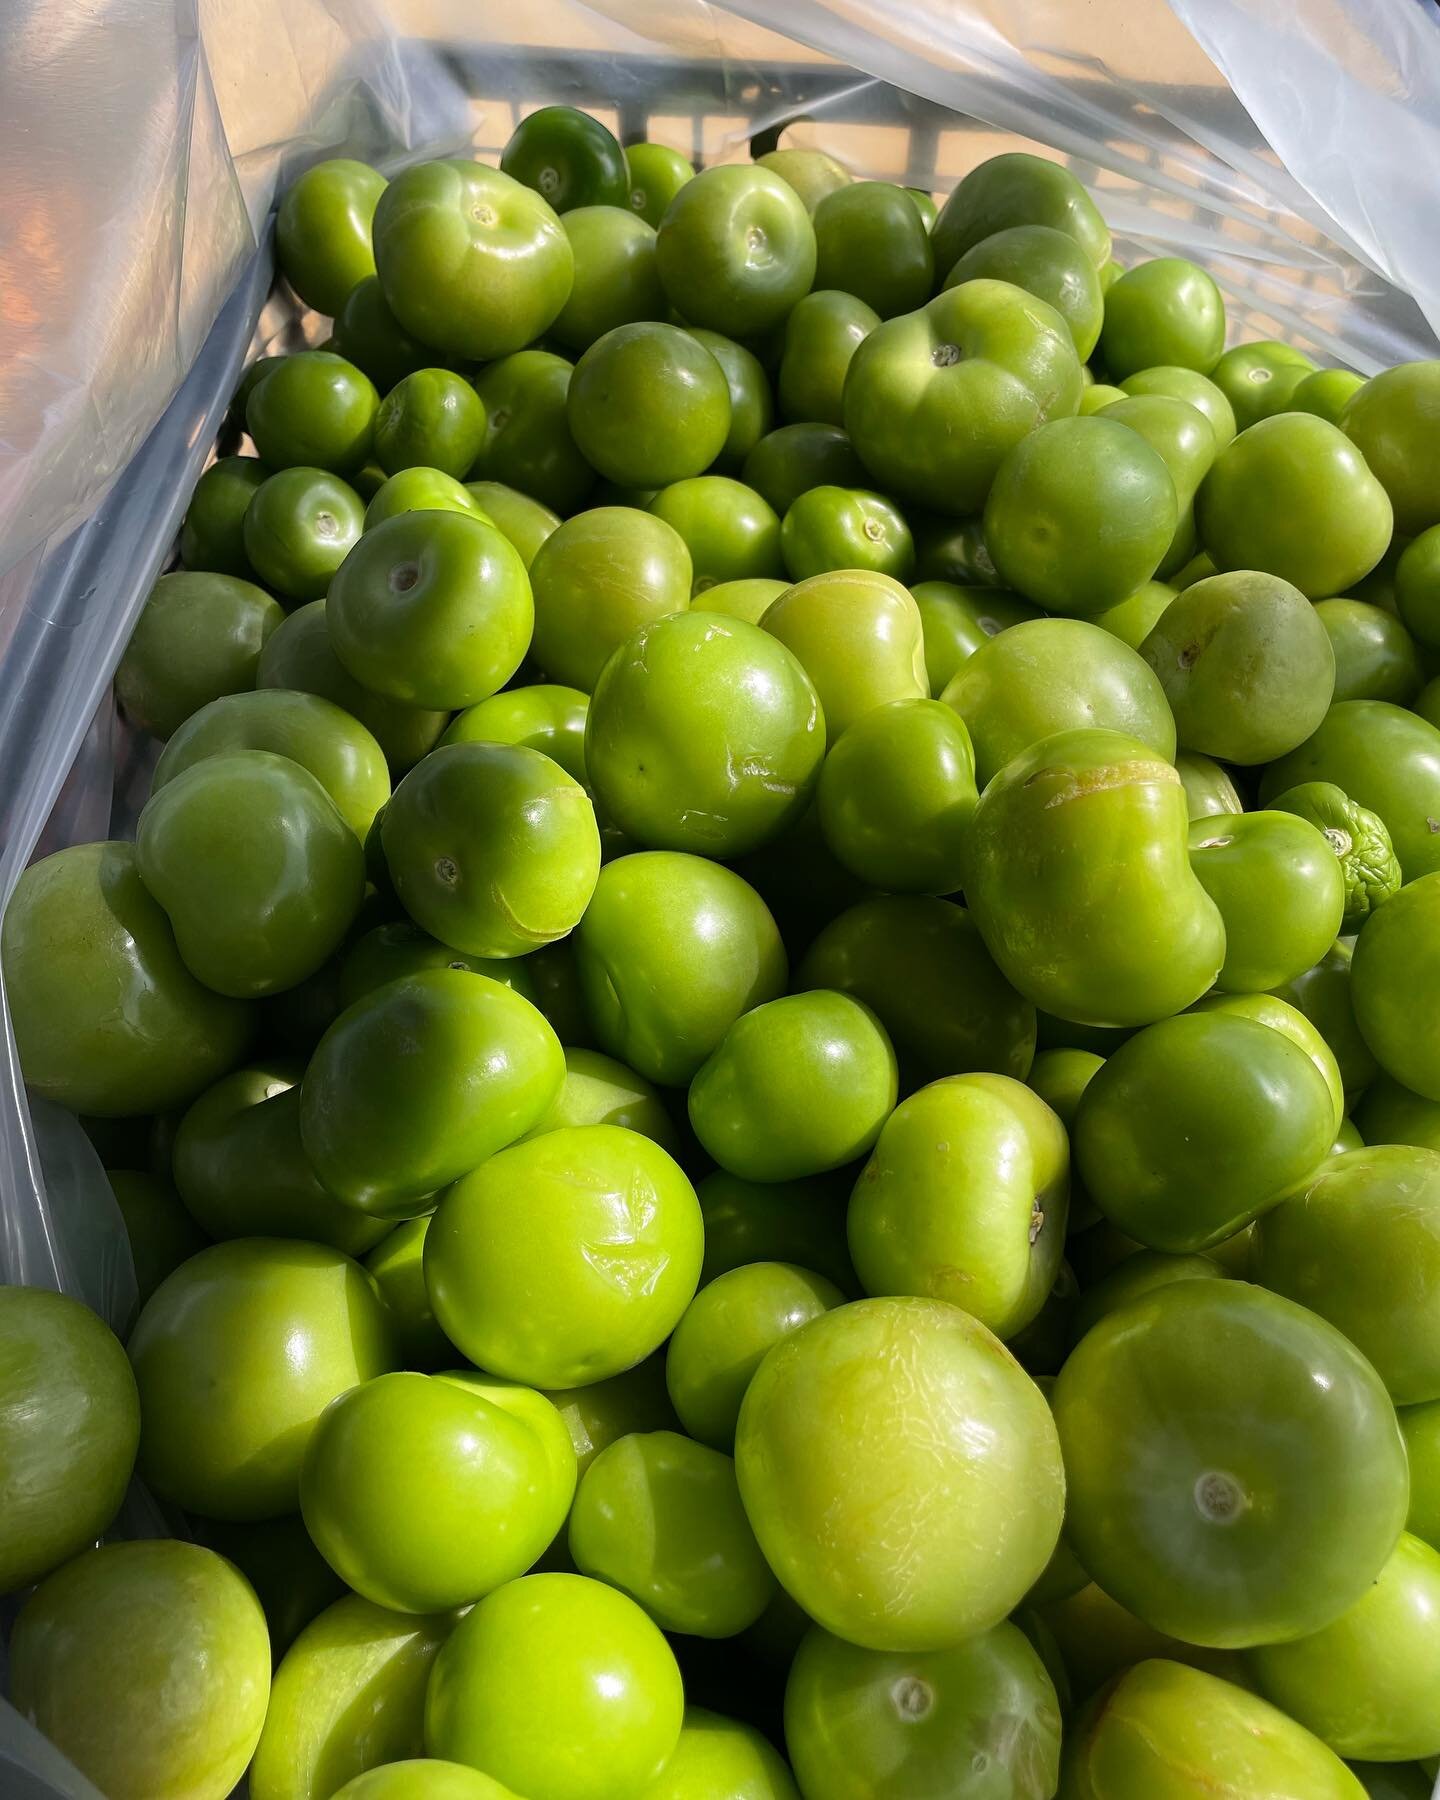 600 tomatillos husked, washed,  dried and ready to chop for our green avocado salsa to sell at our Abraxas Garden Fall Fundraiser this Saturday from 9-12. You won&rsquo;t want to miss out on this stuff!